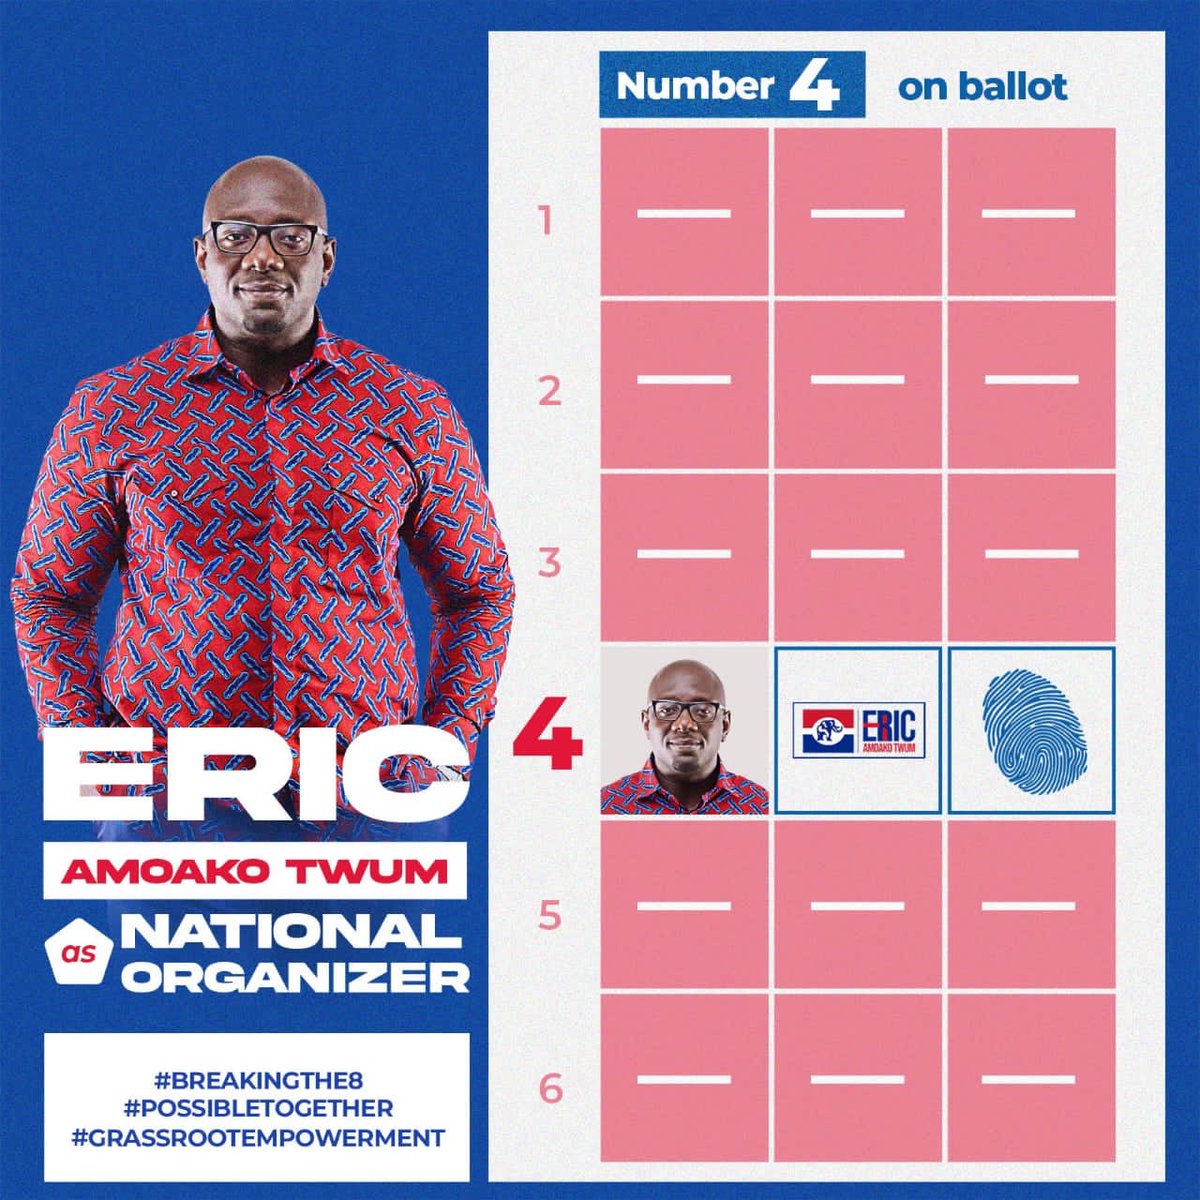 Official Release!

The next National Organizer, ERIC AMOAKO TWUM is *number 4* on the ballot. 
Indeed, he is the National Organizer to give us *4more* years in power.

#PossibleTogether
#GrassrootsEmpowerment
#4More4romEric